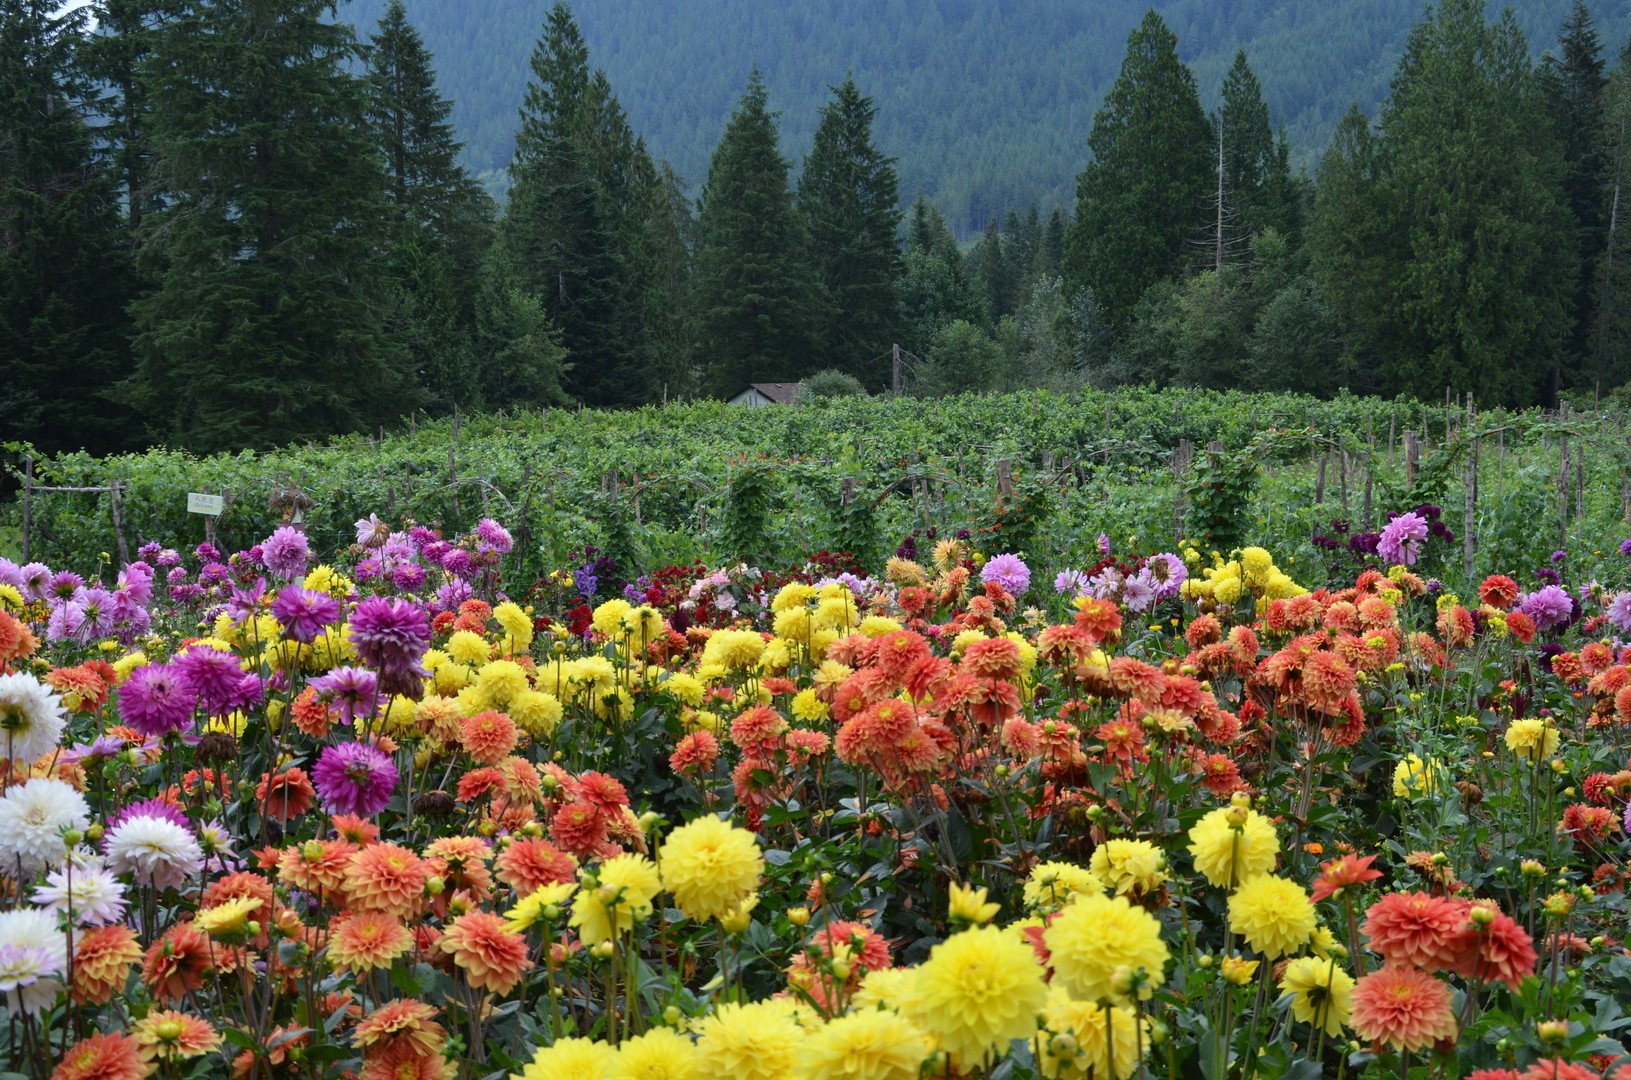 2020 Mission Dahlia Flower and Grape Festival, Fraser Valley F, British Columbia, Canada